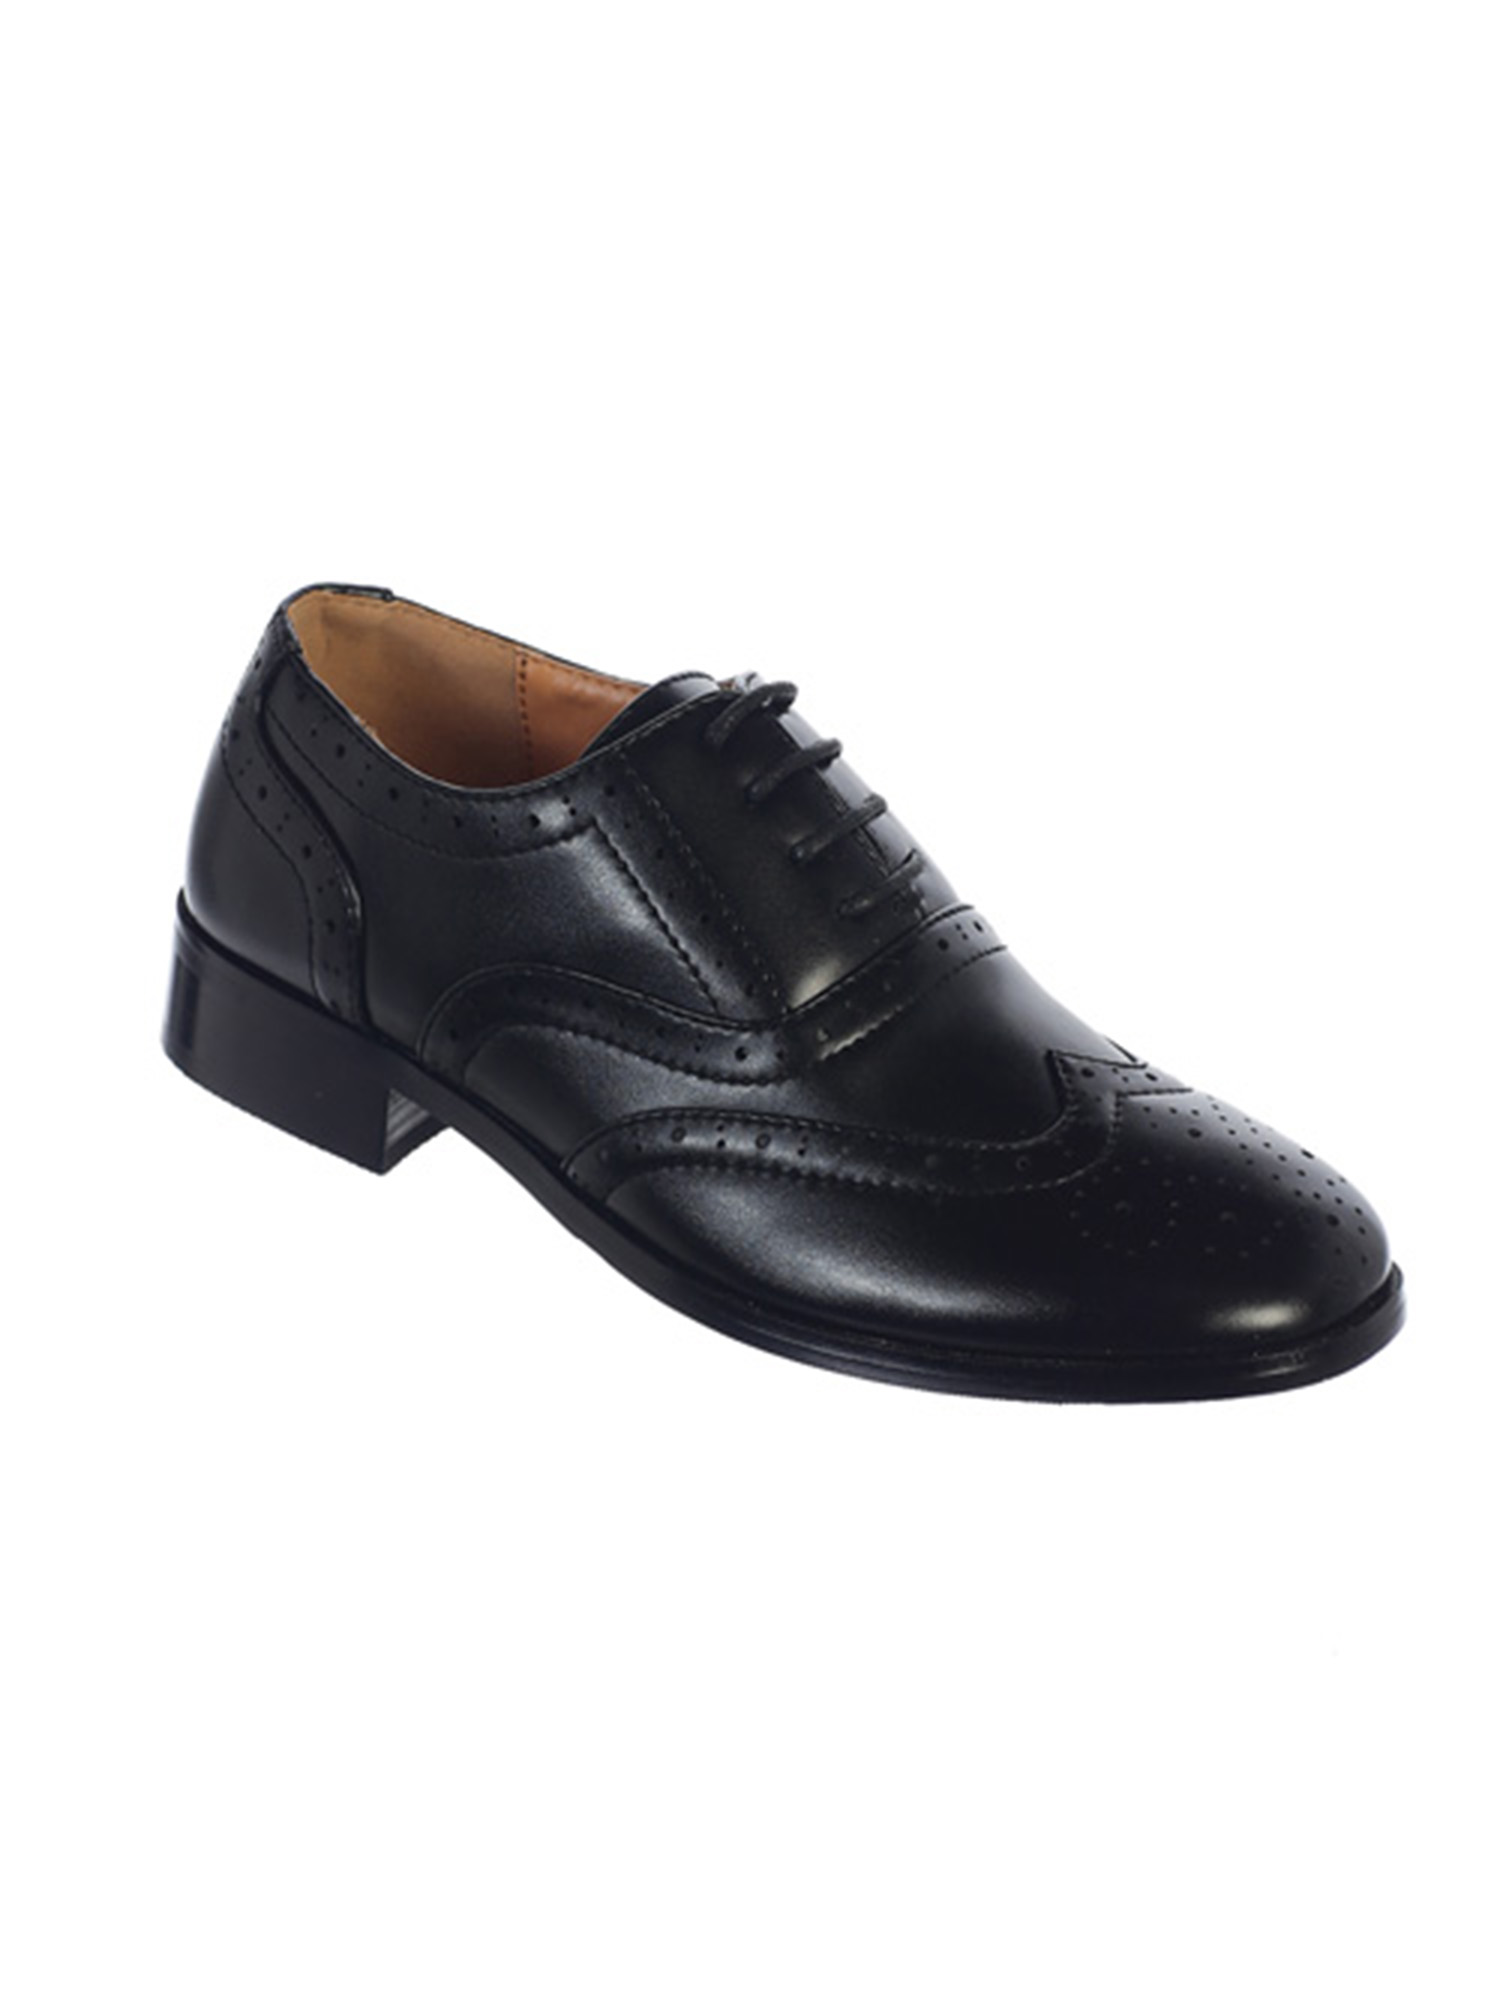 Avery Hill Boys Lace-Up Formal Oxford Style Special Occasion Dress Shoes - Black LittleKid 1